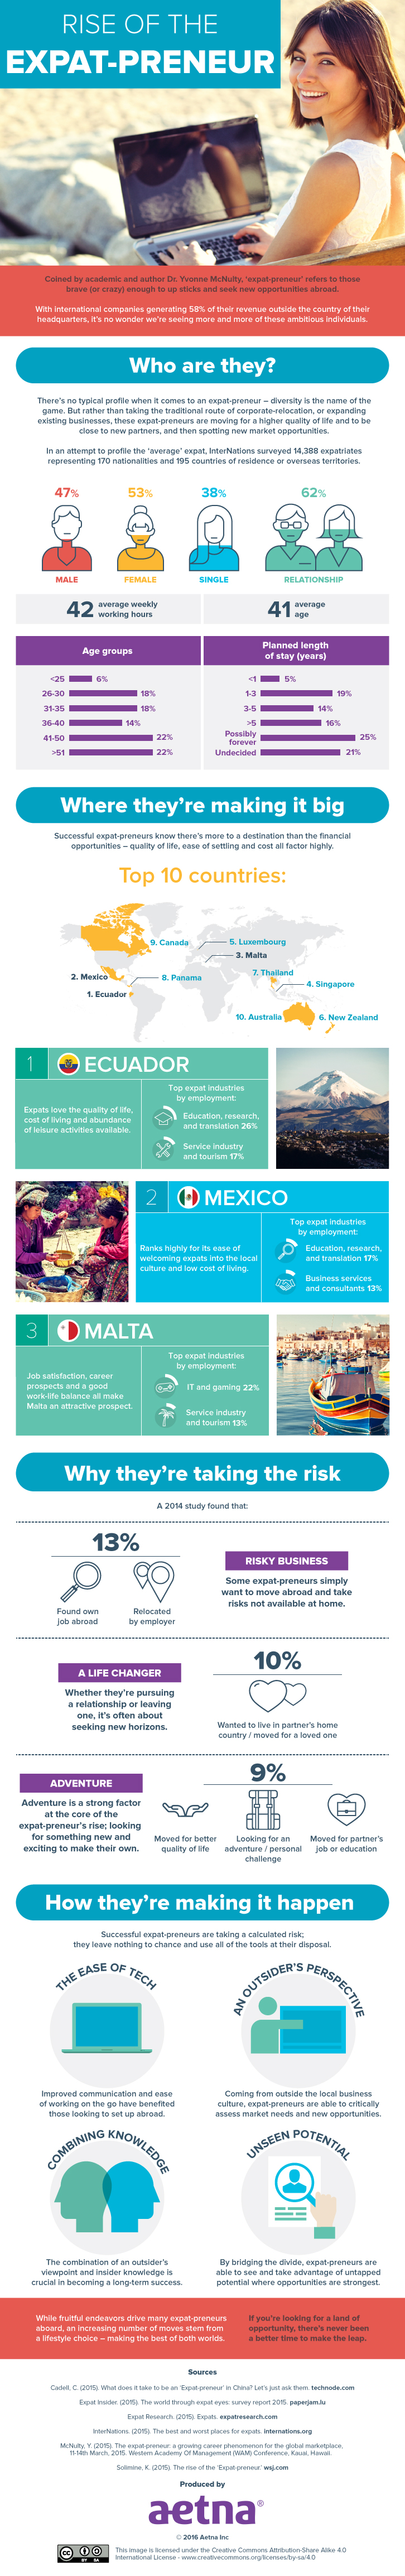 The Rise of the Expat-preneurs [Infographic]